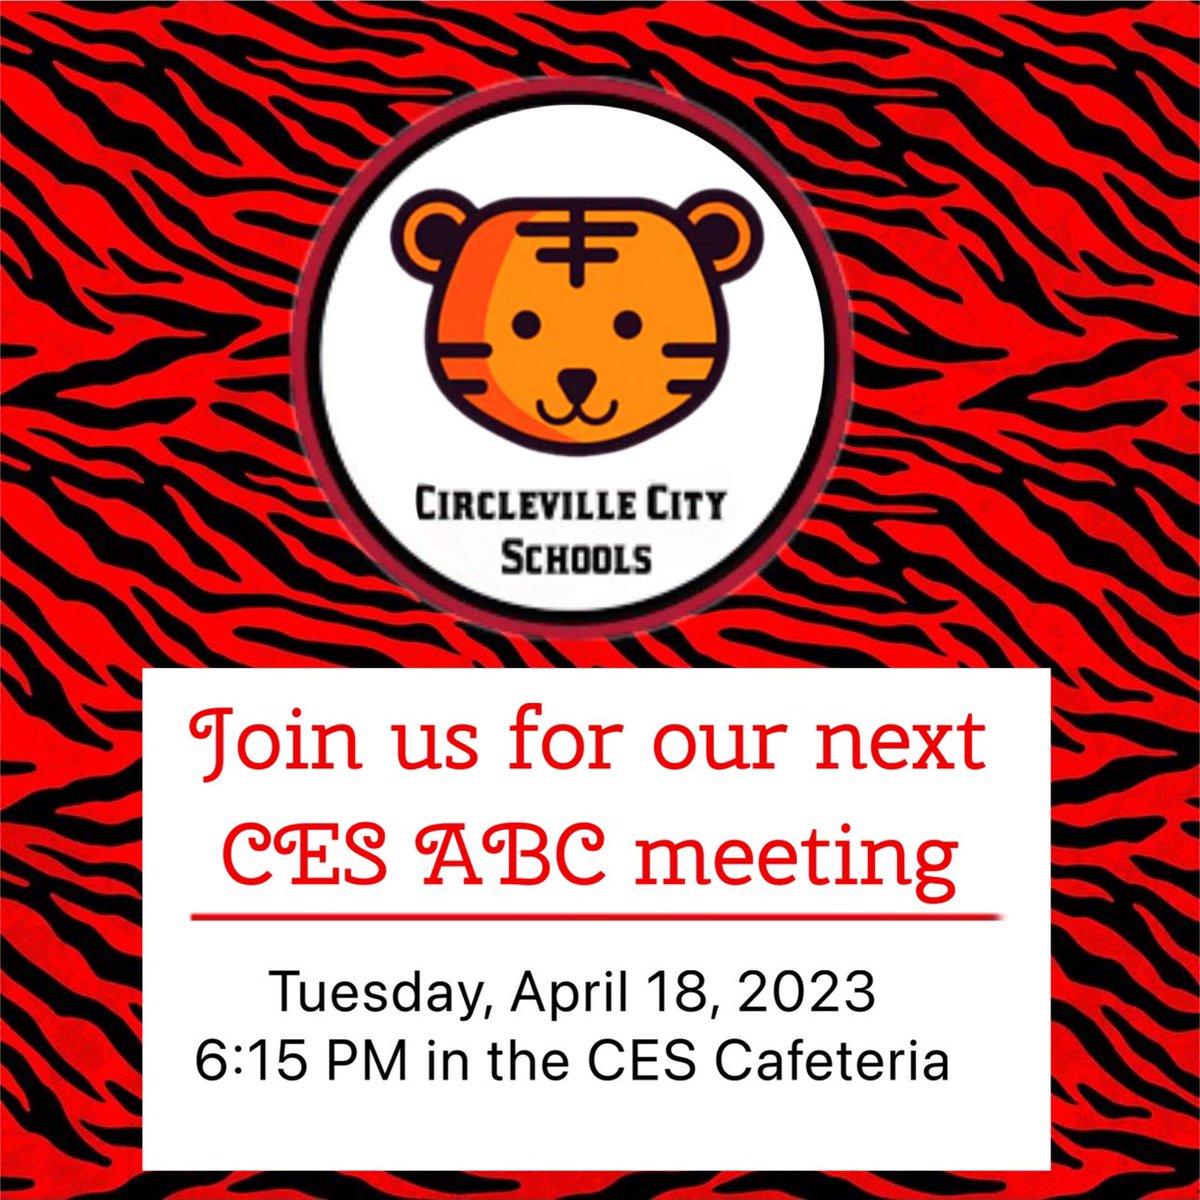 Join us! New faces are always welcomed 🐯 Let’s discuss upcoming projects and activities for our students and staff 🐯
.
@CESTigerPride @CirclevilleCity #tigerpride 
.
.
.
#circlevilleelementary #cestigers #circleville #parentinvolvement #partypeople